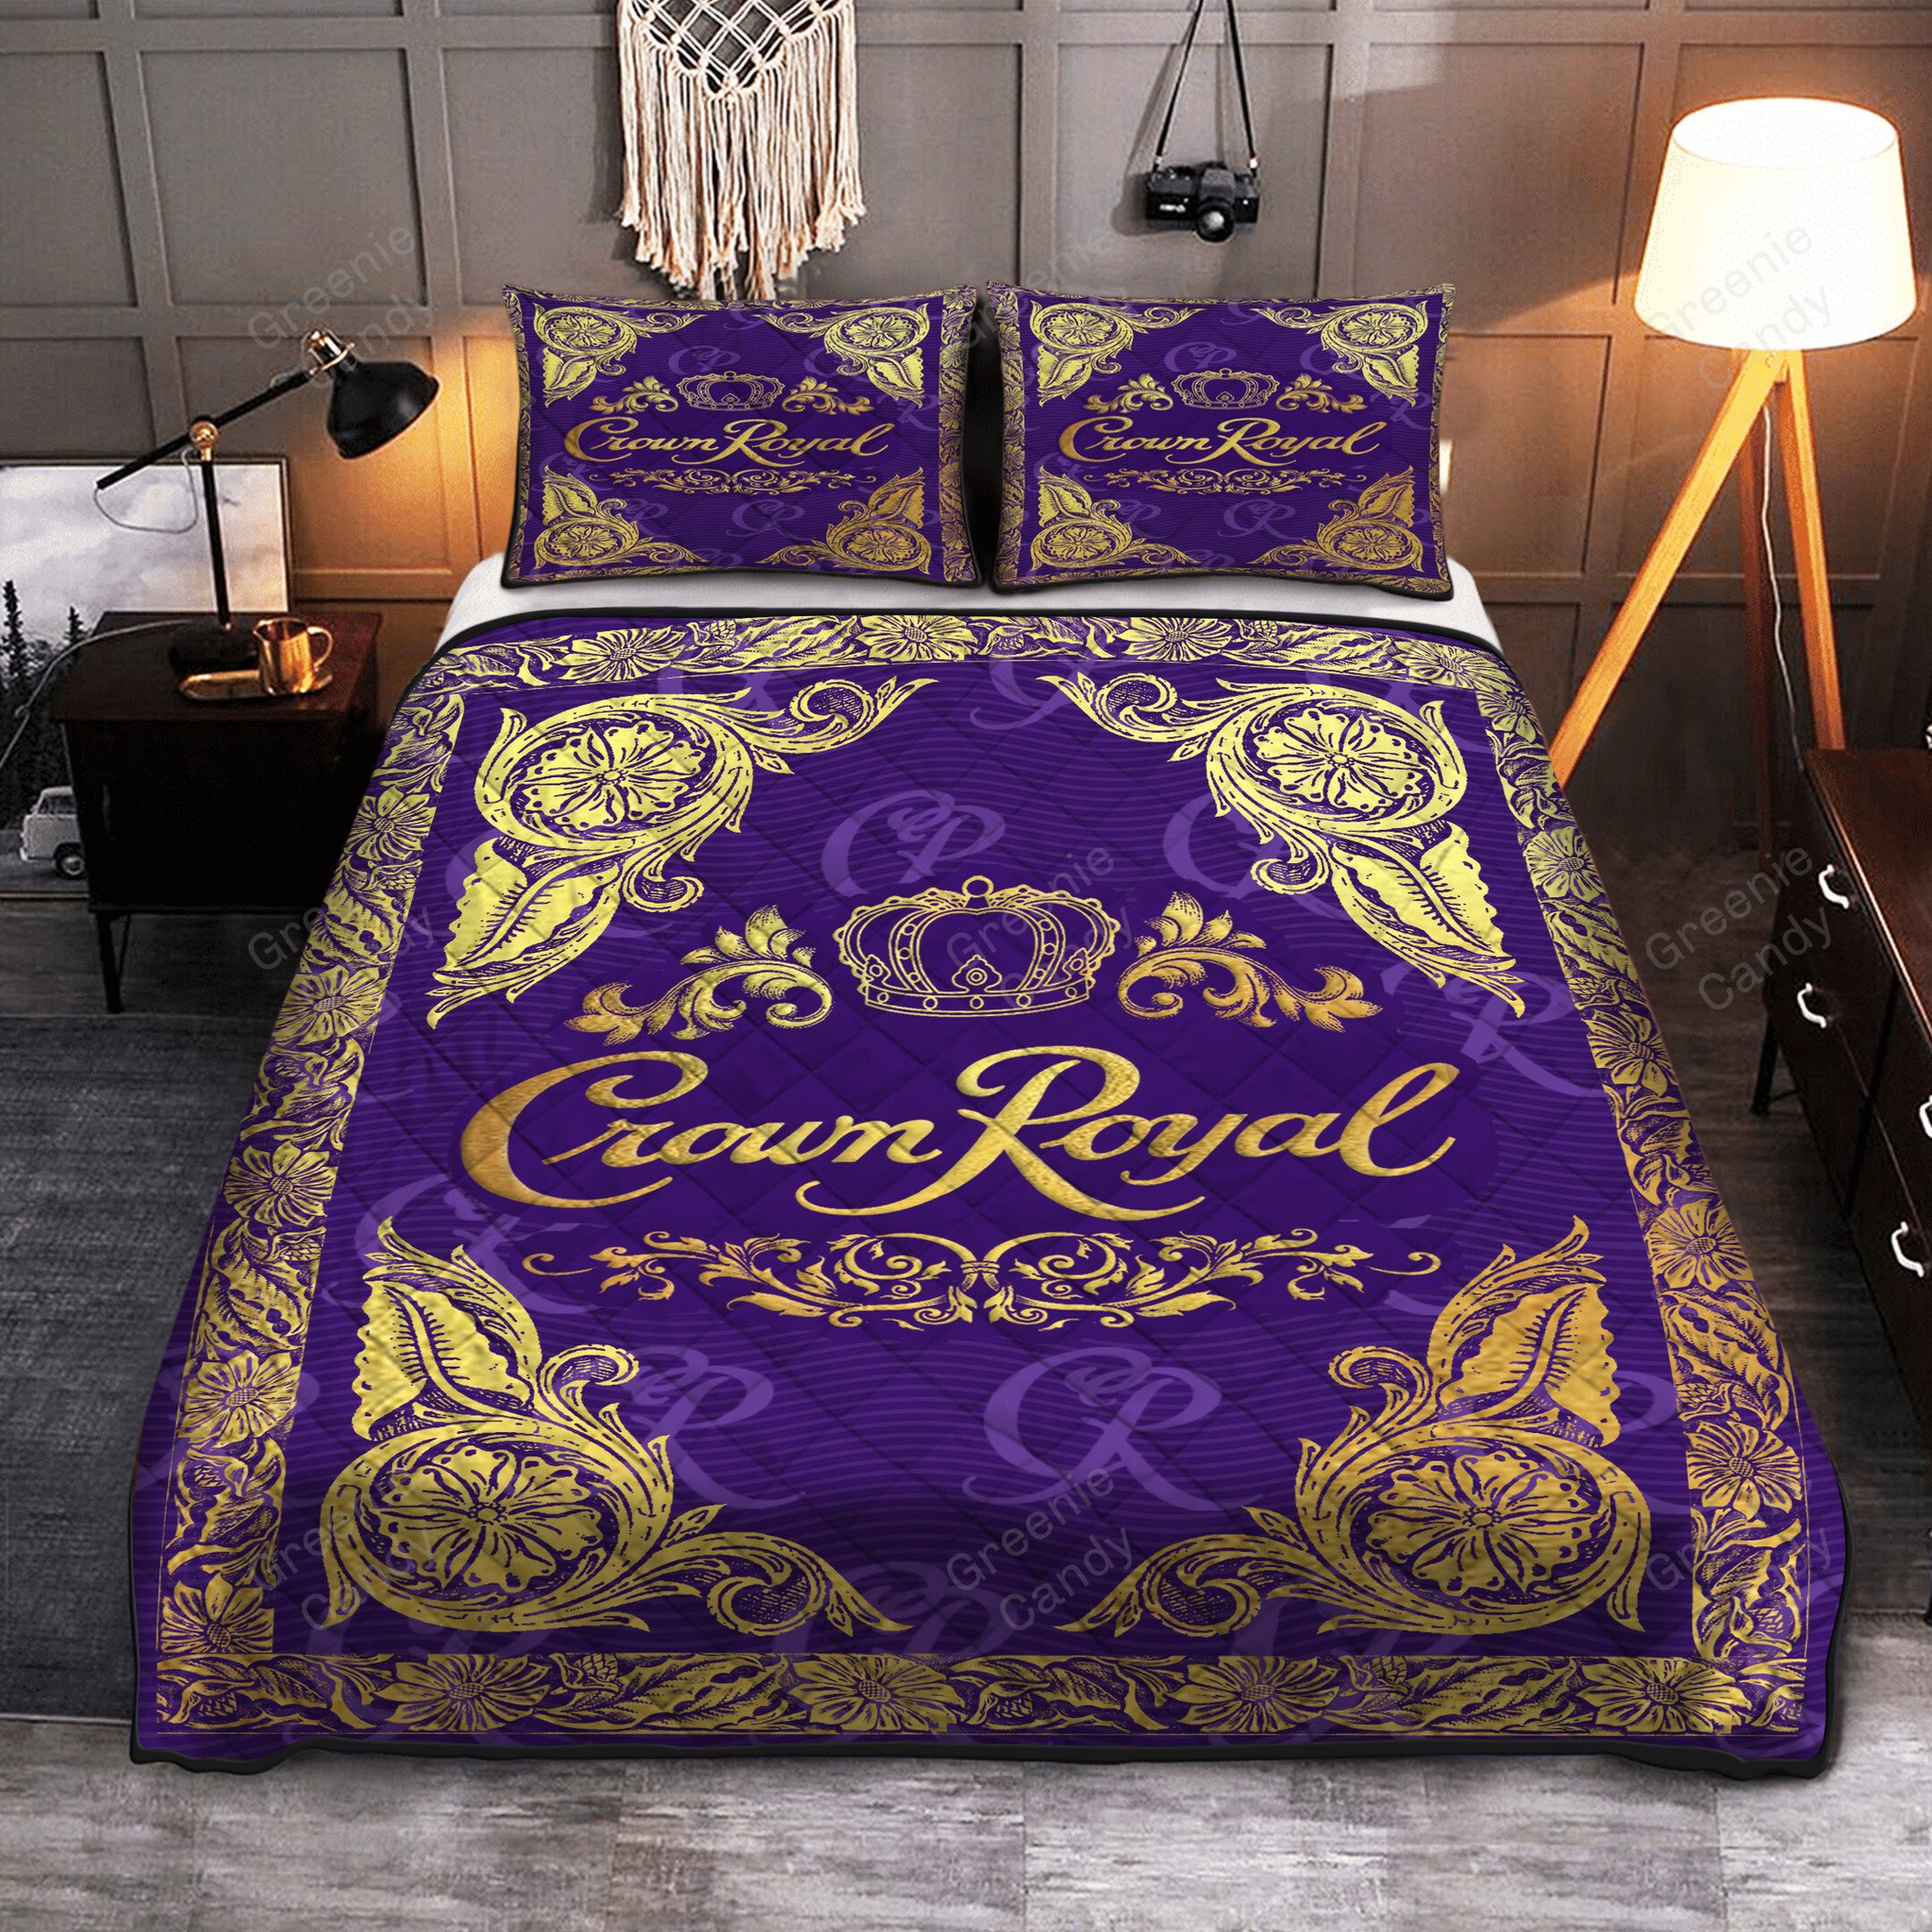 NEW Crown Royal Deluxe Whiskey Bedding Set 1